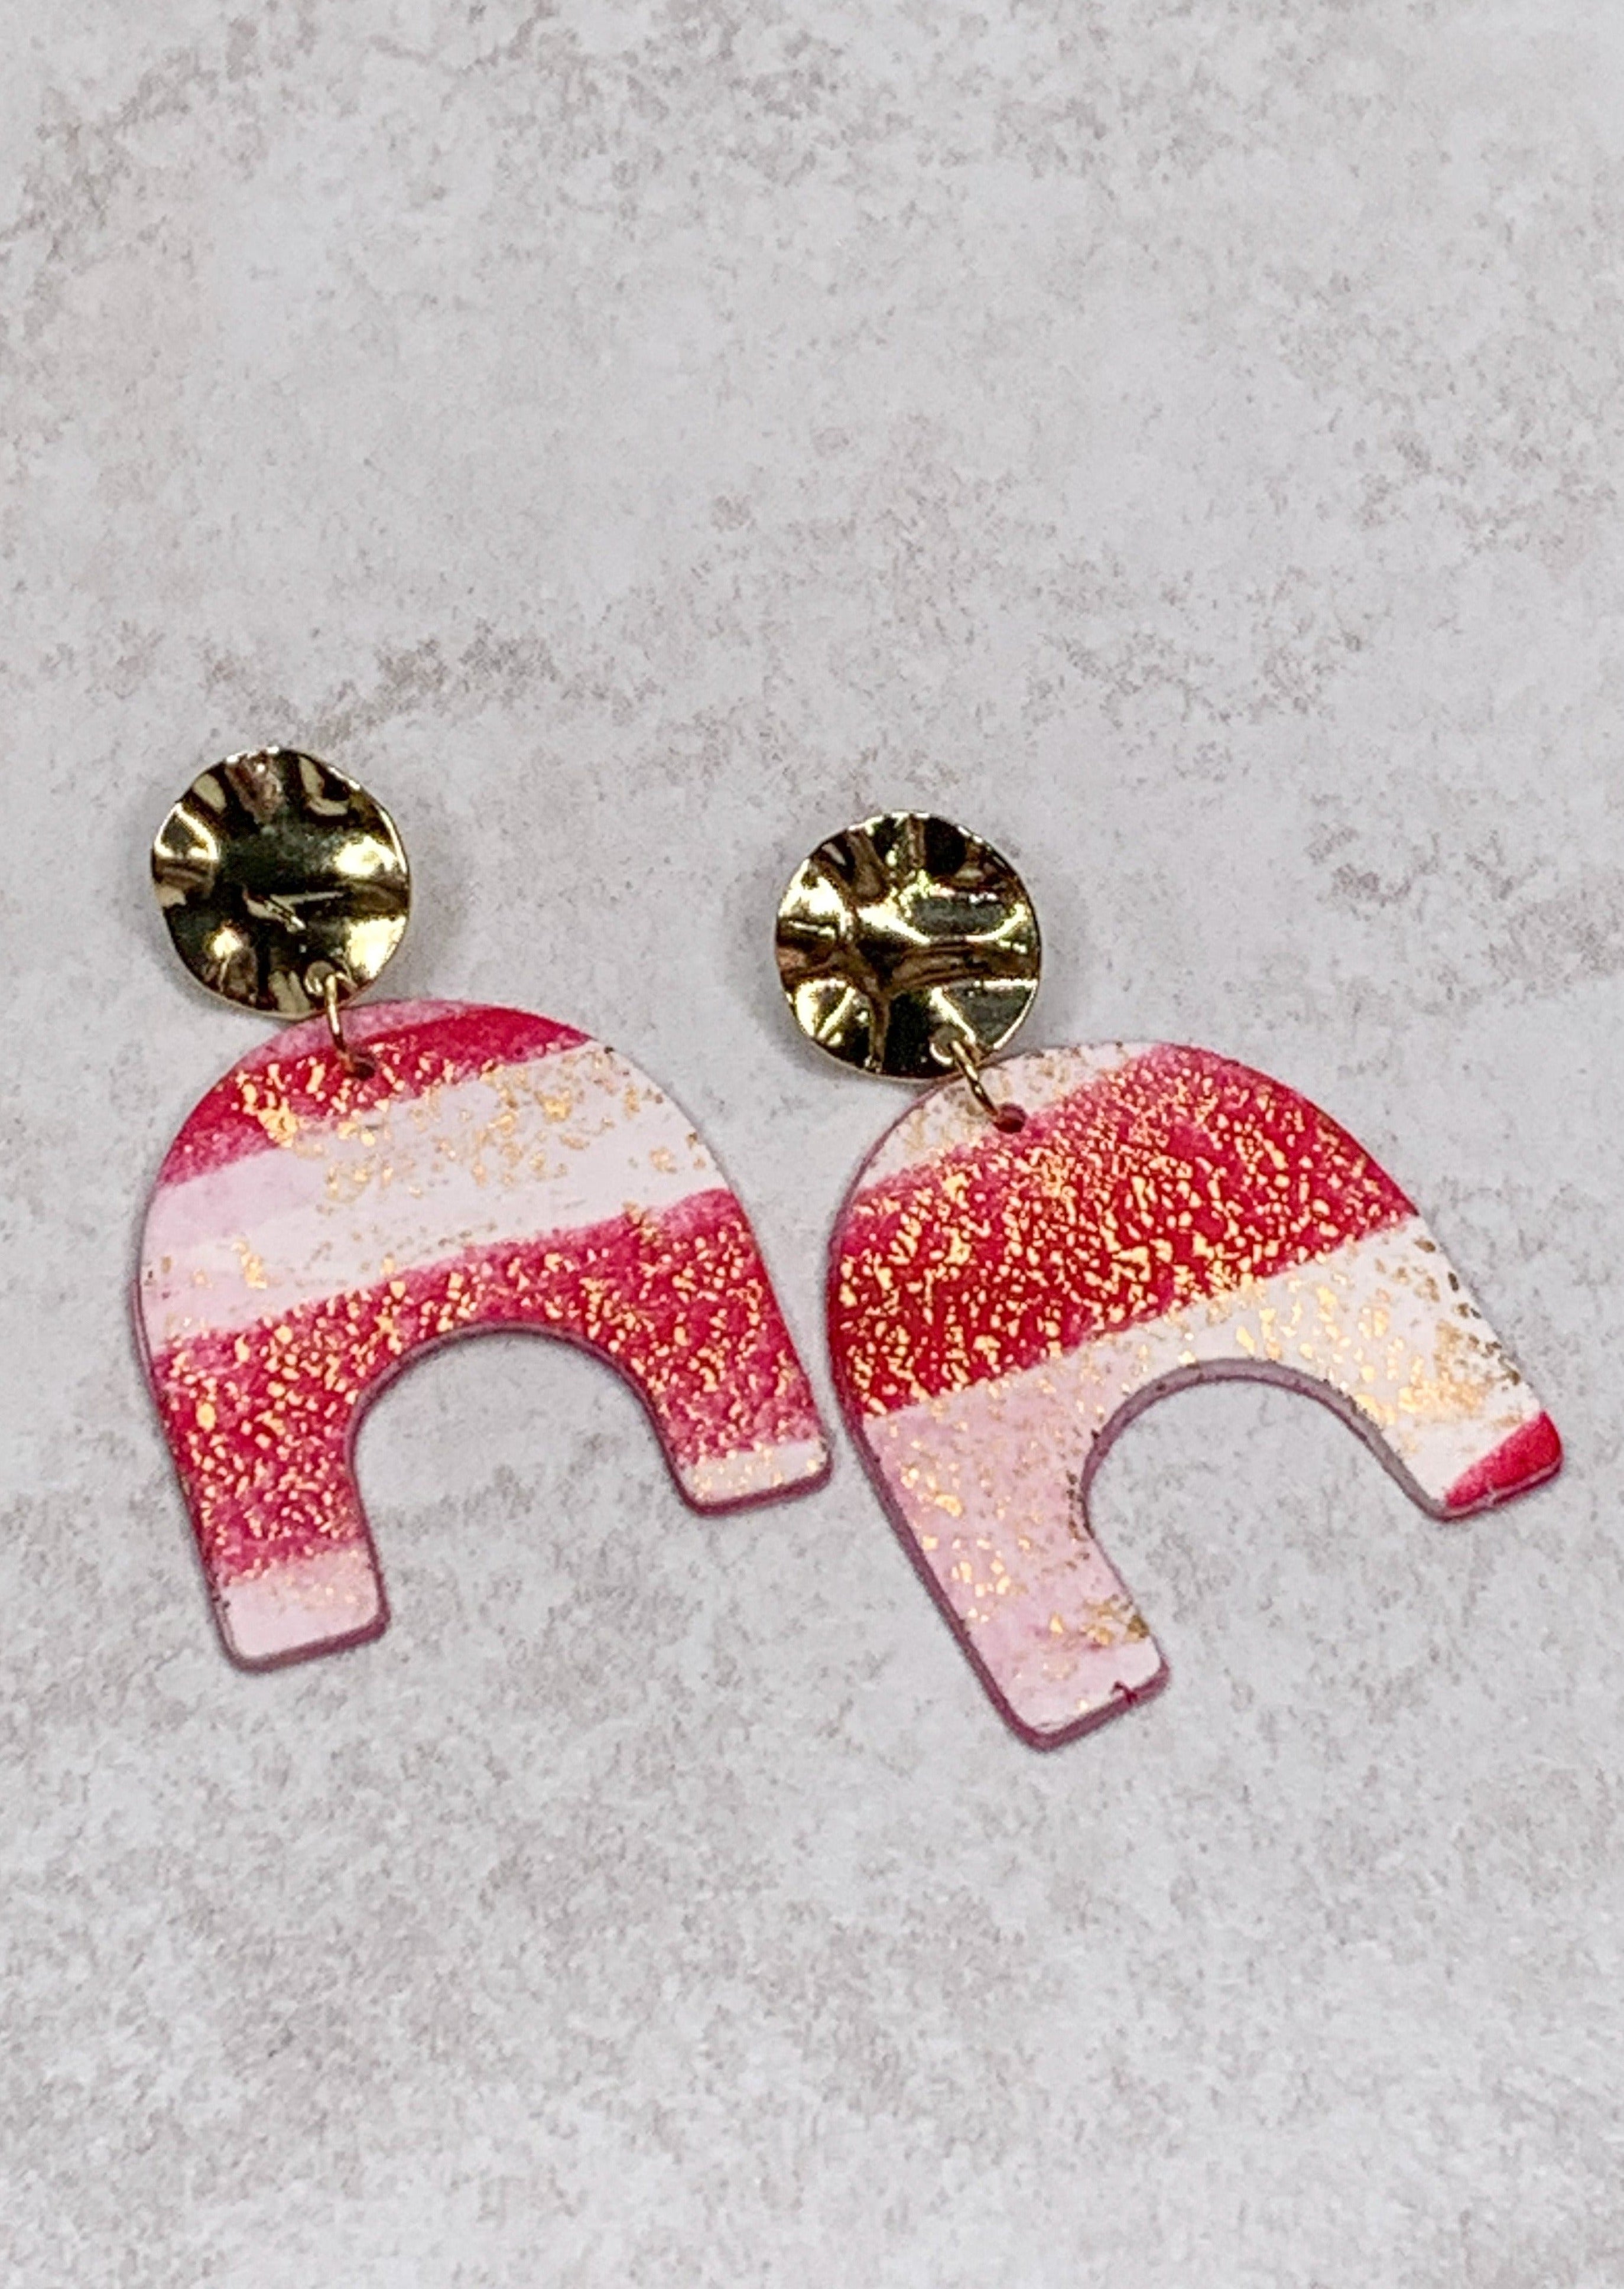 Striped Pink and Gold Polymer Clay "U" Earrings